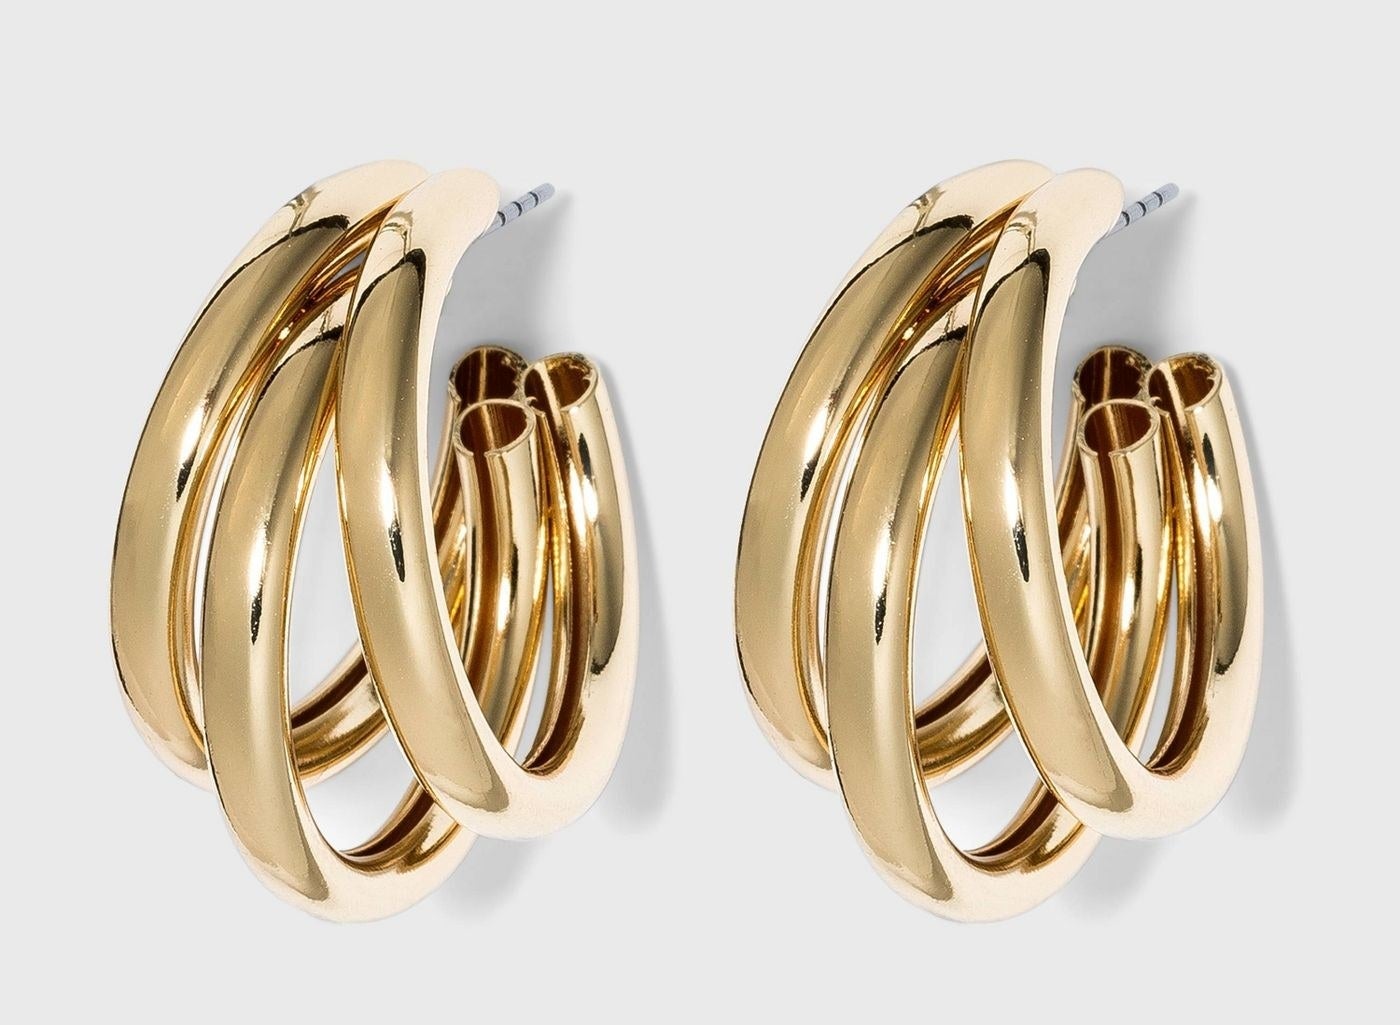 Nickel-free gold hoop earrings with high-shine finish